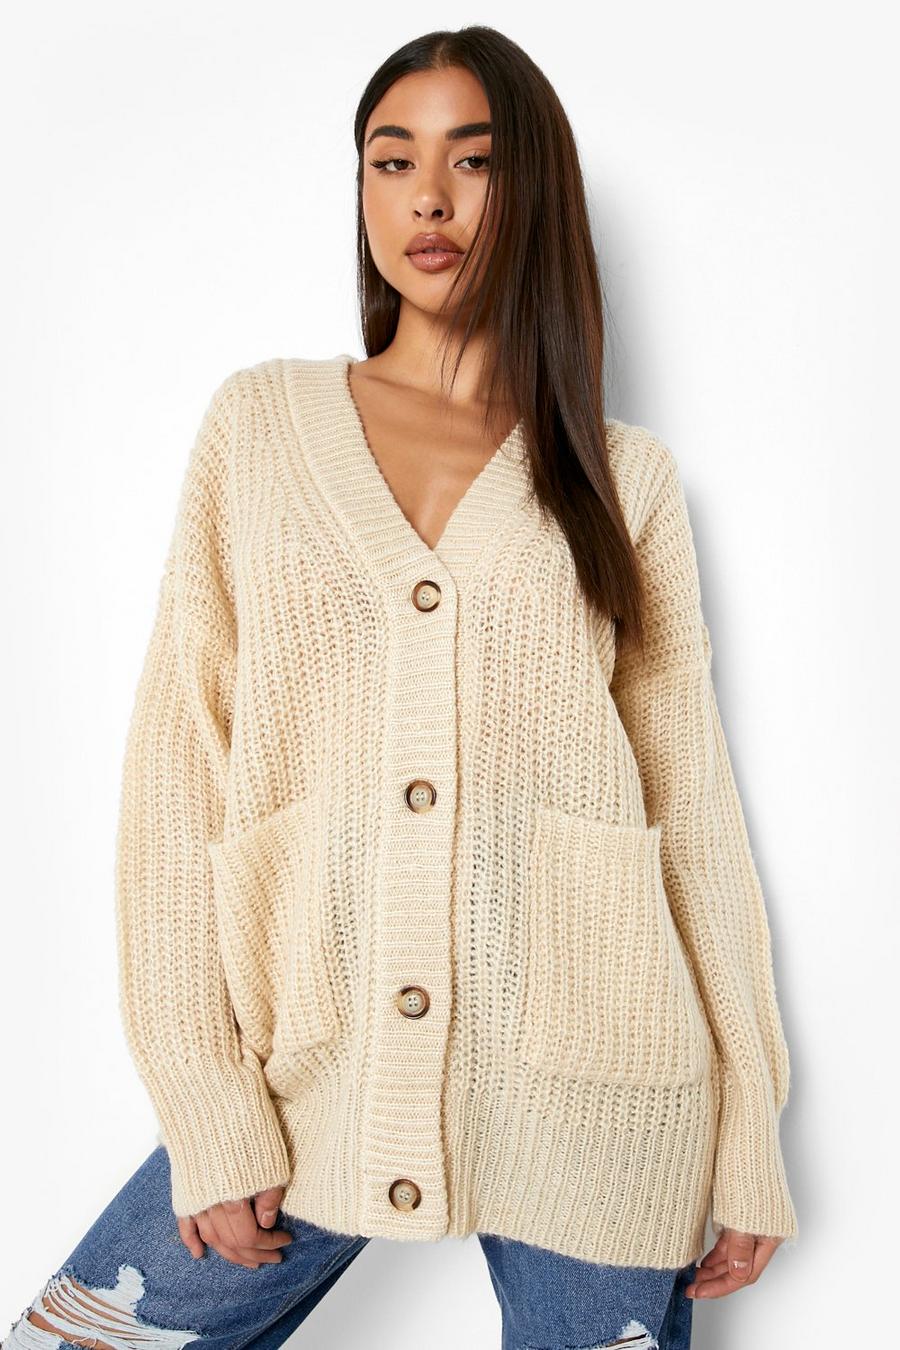 Cethrio Womens Cardigans Soft Casual Clearance Oversized Knitted